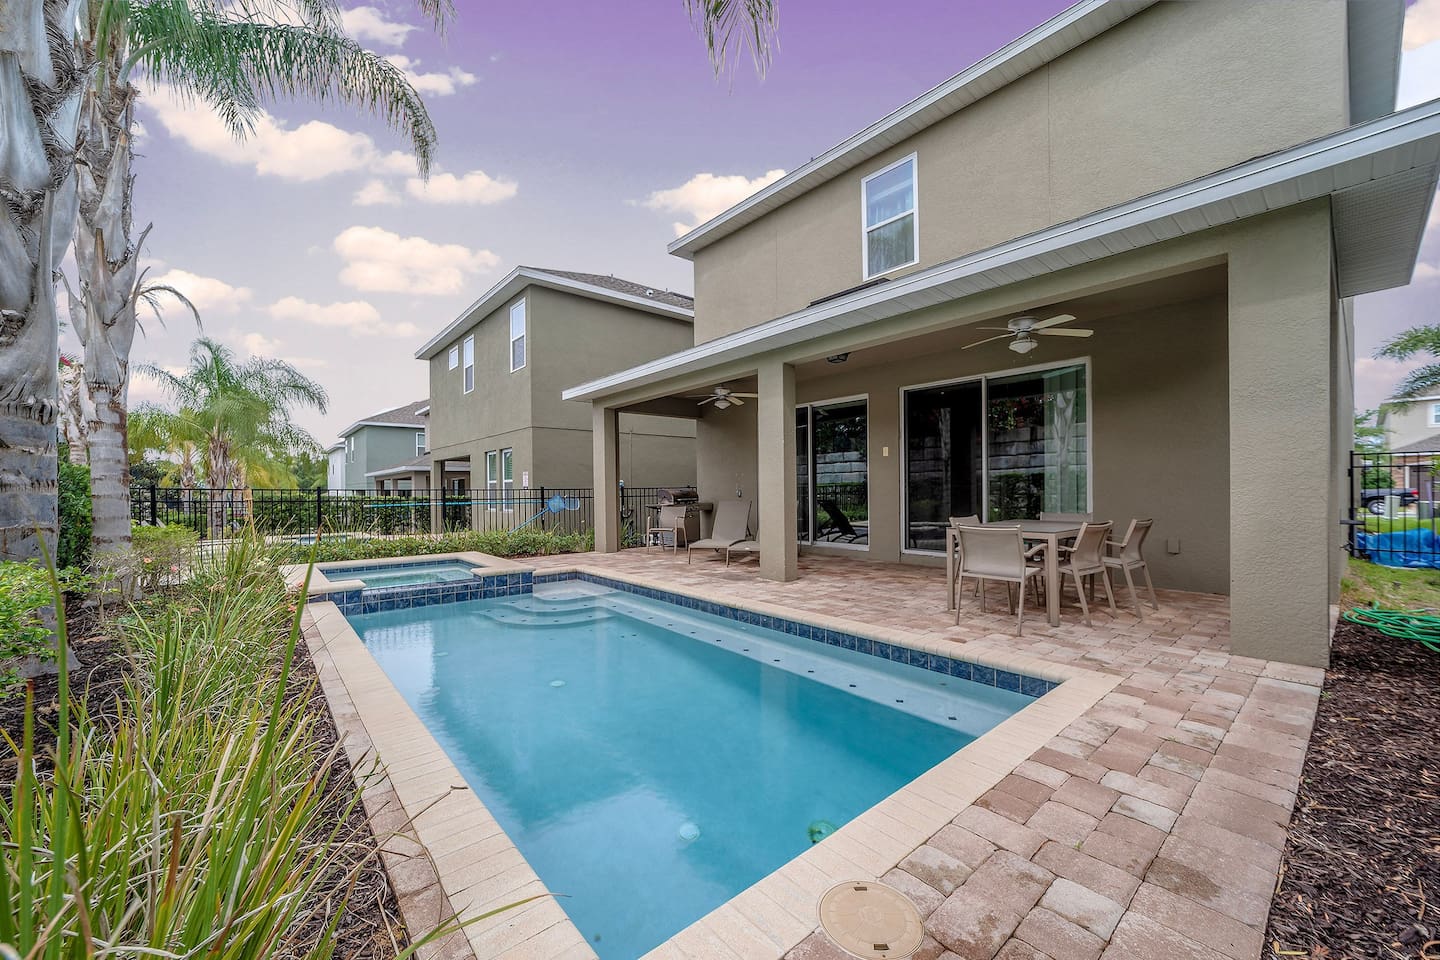 13 Family Home: 13 Bedroom Holiday Rental in Kissimmee FL (13